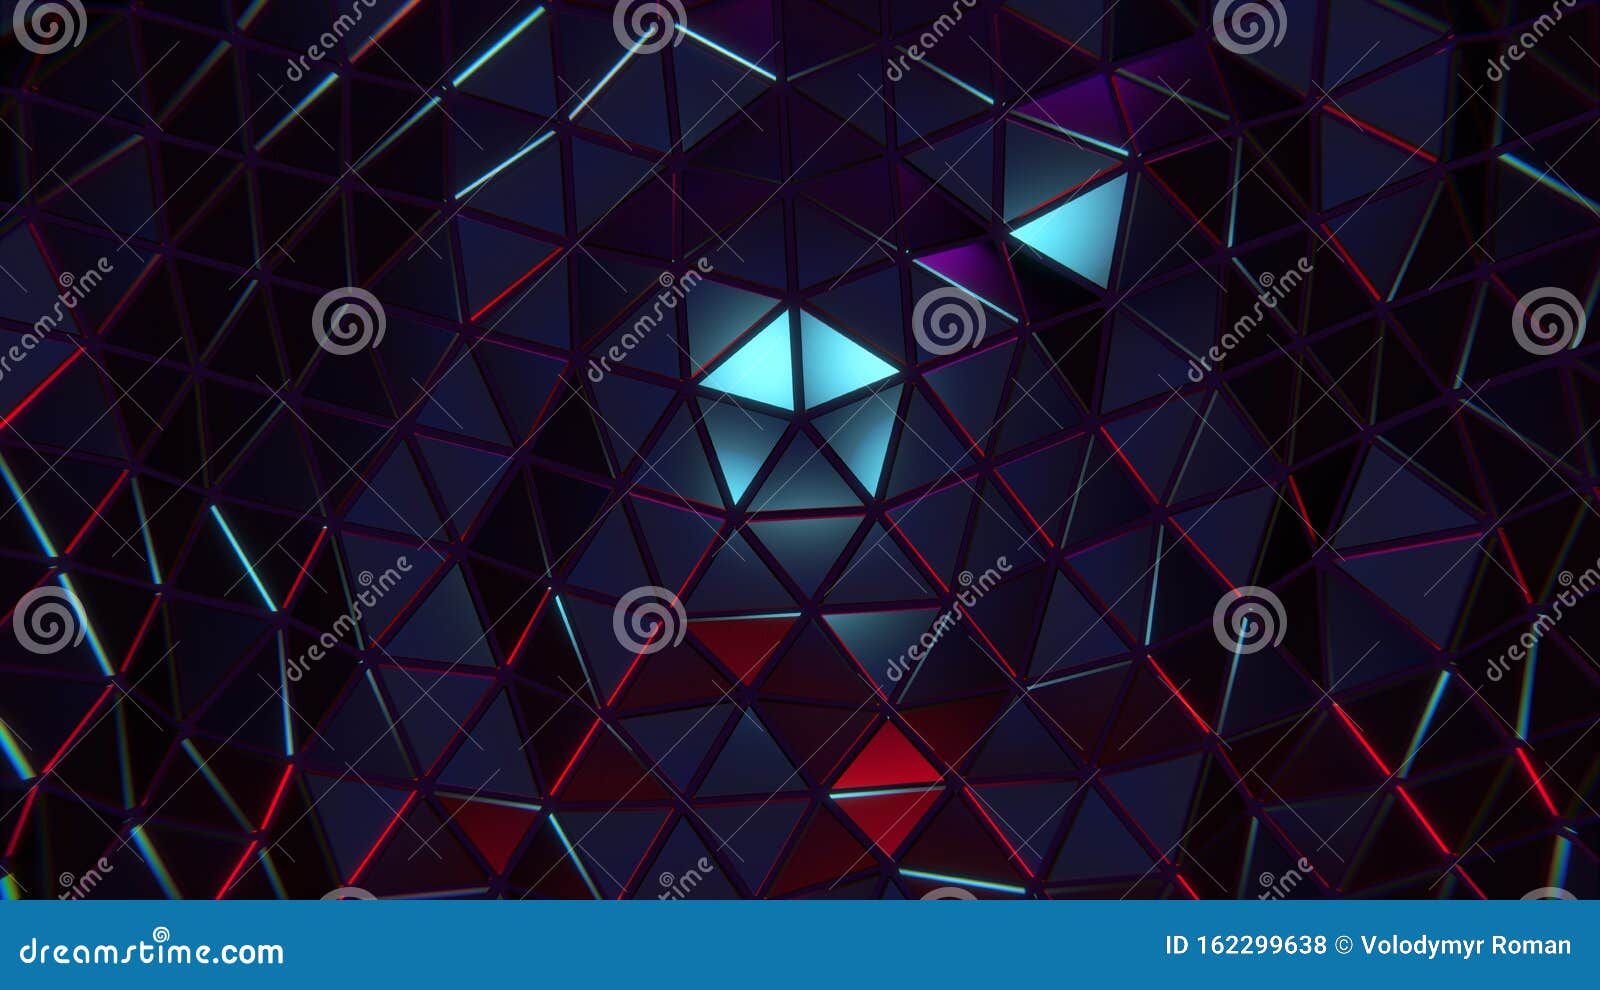 Ultra Hd Purple Sci Fi Technology Wallpaper Suitable For Application Desktop Banner Background Print Backdrop And Other Stock Illustration Illustration Of Connect Idea